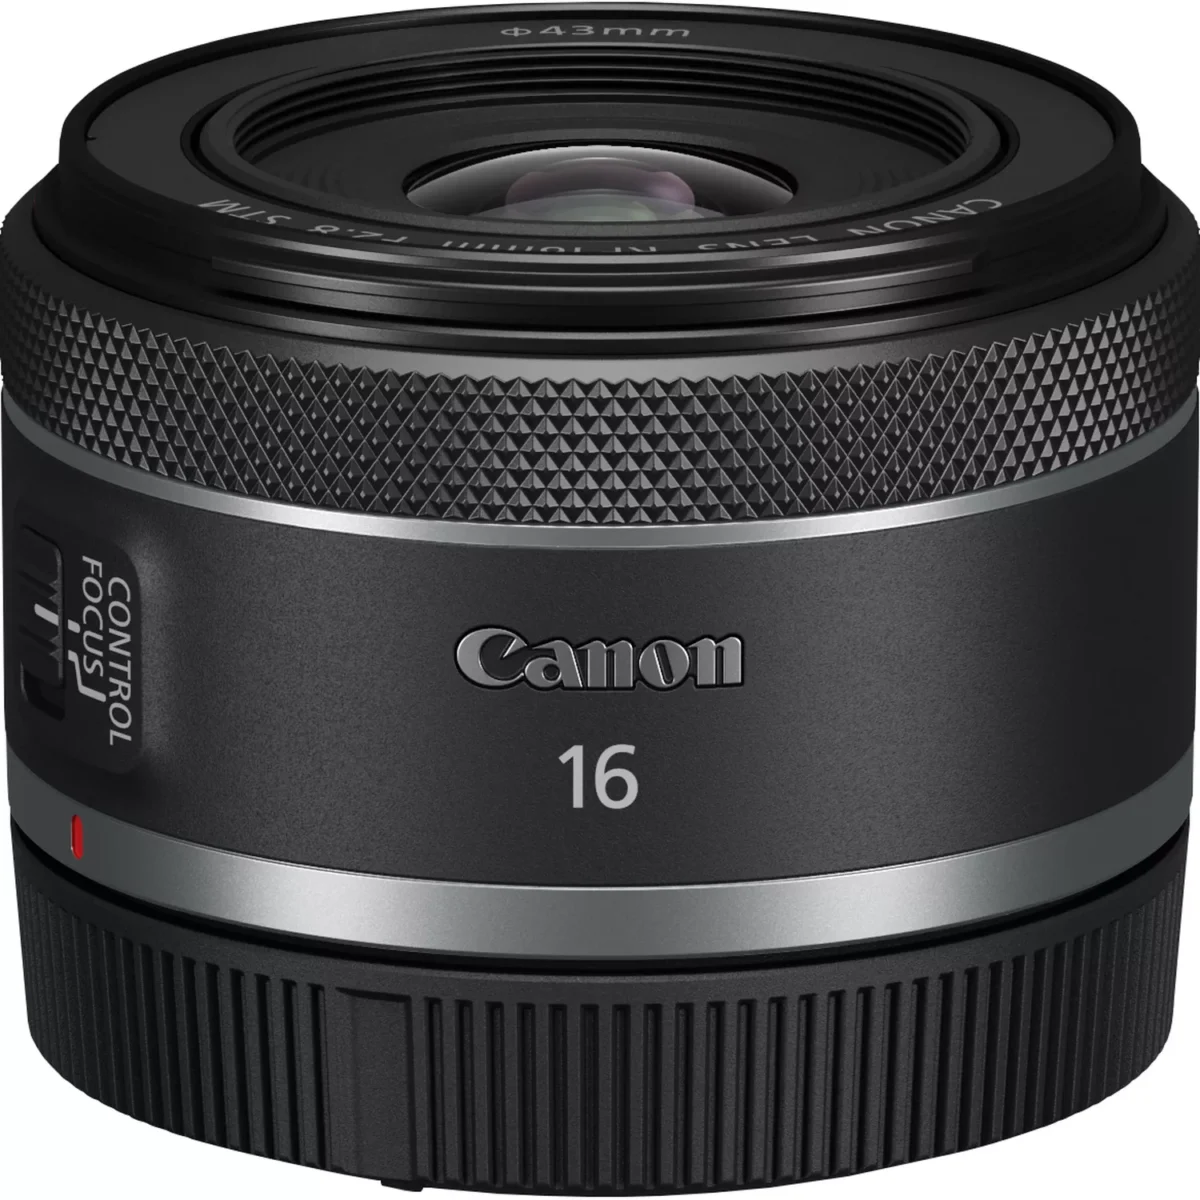 Canon RF 16mm F2.8 STM Lens slanted front view with rear cap